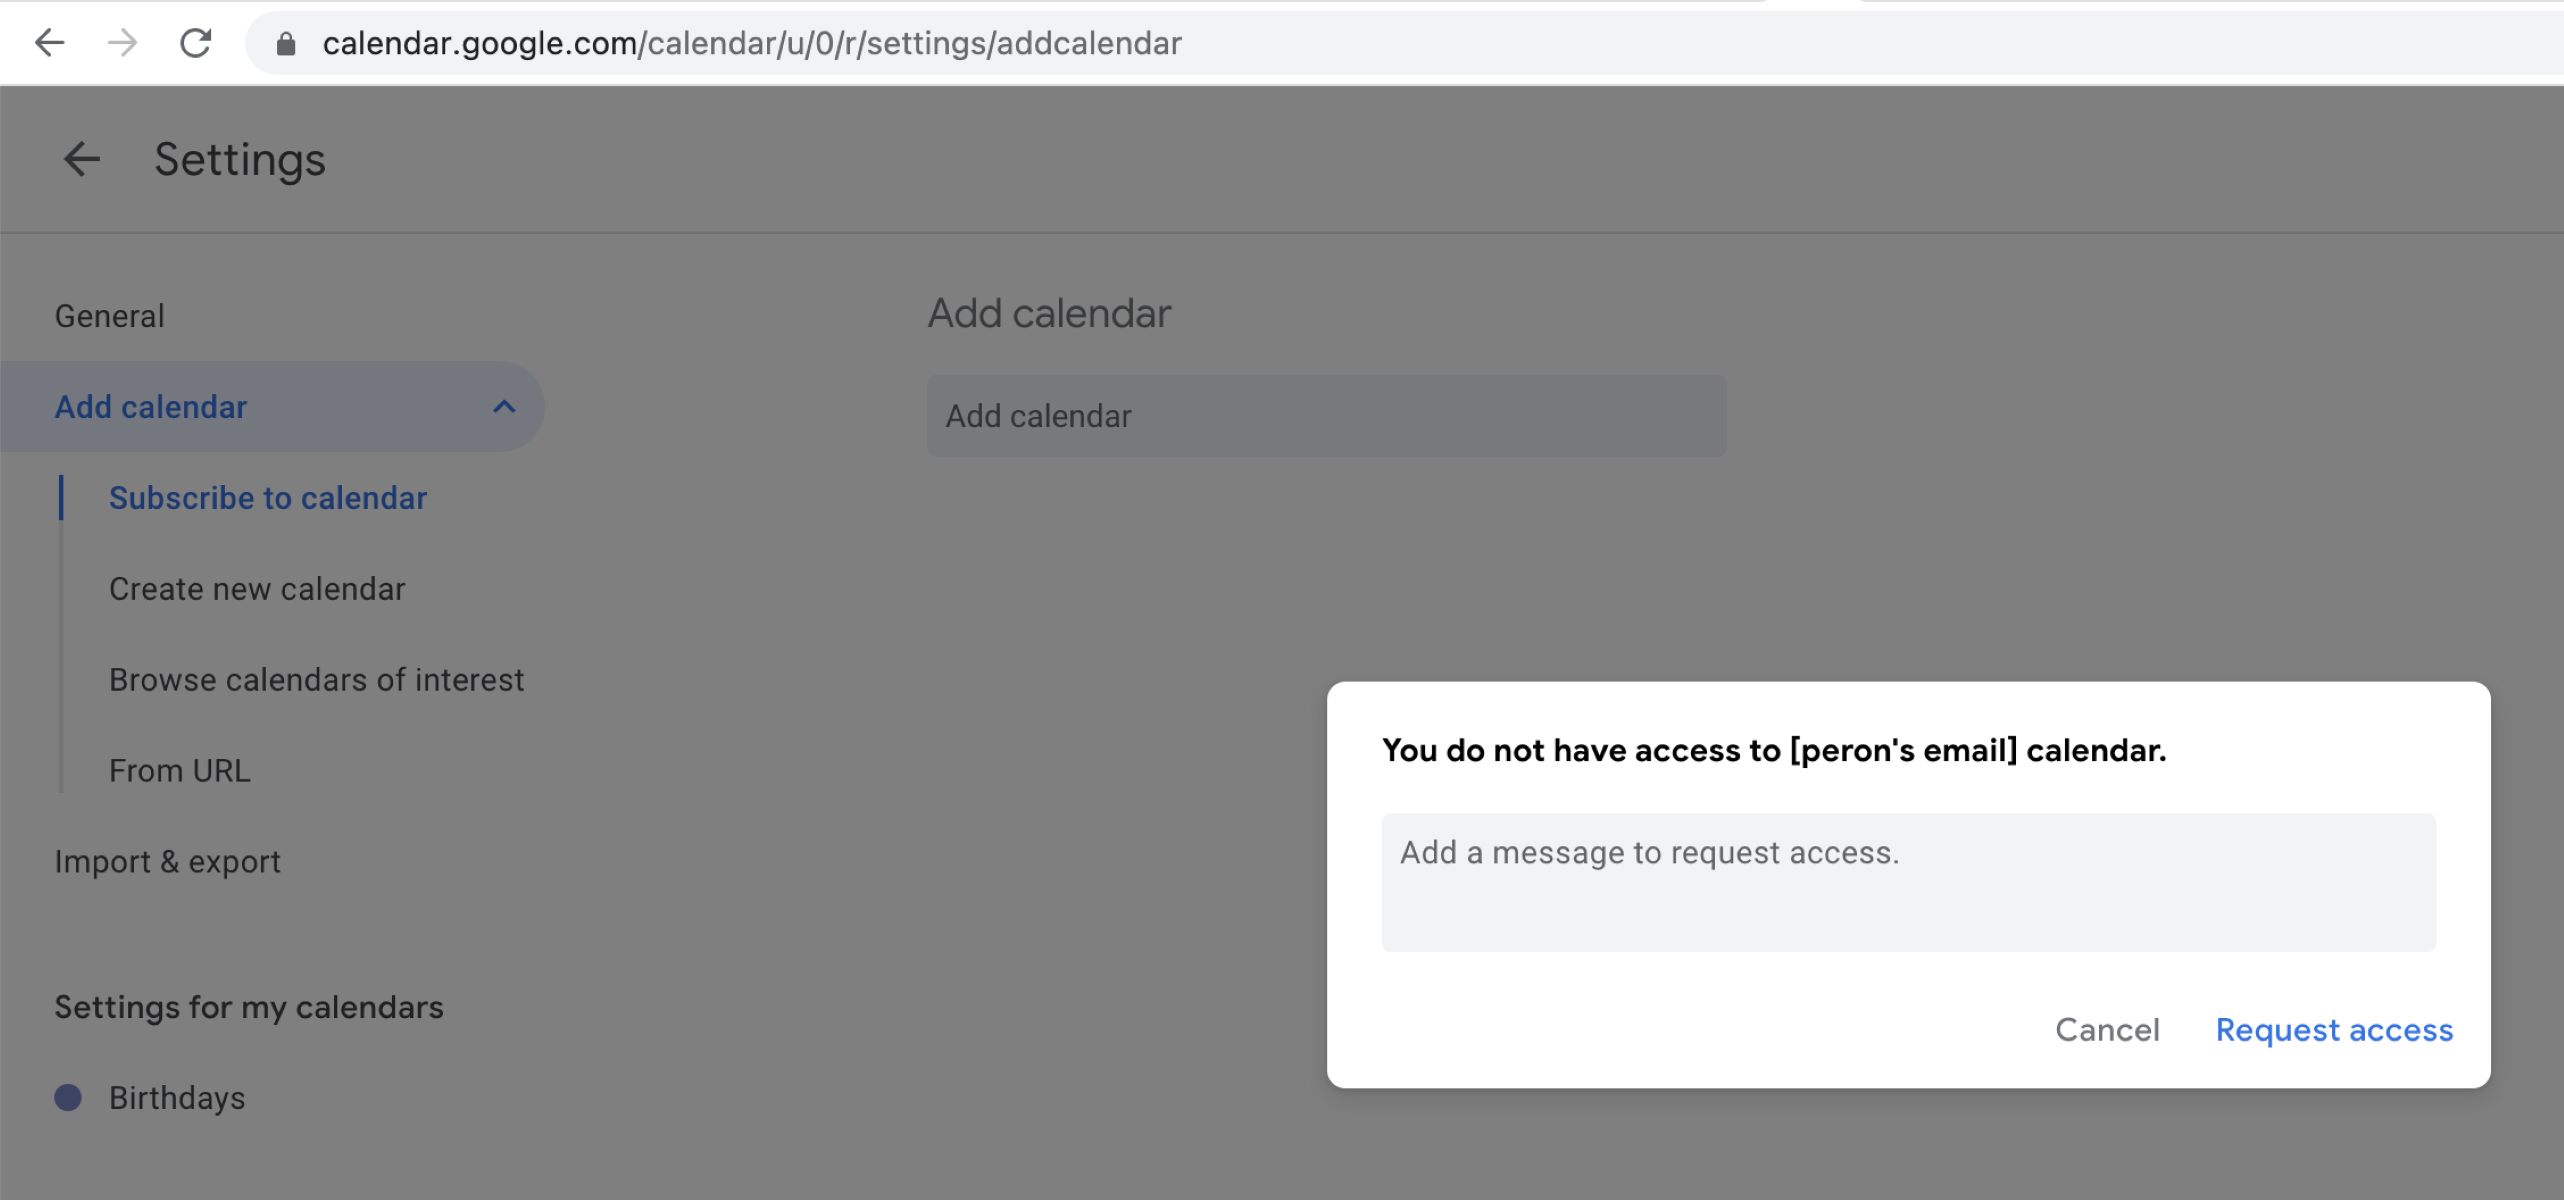 how-to-request-access-to-a-google-calendar